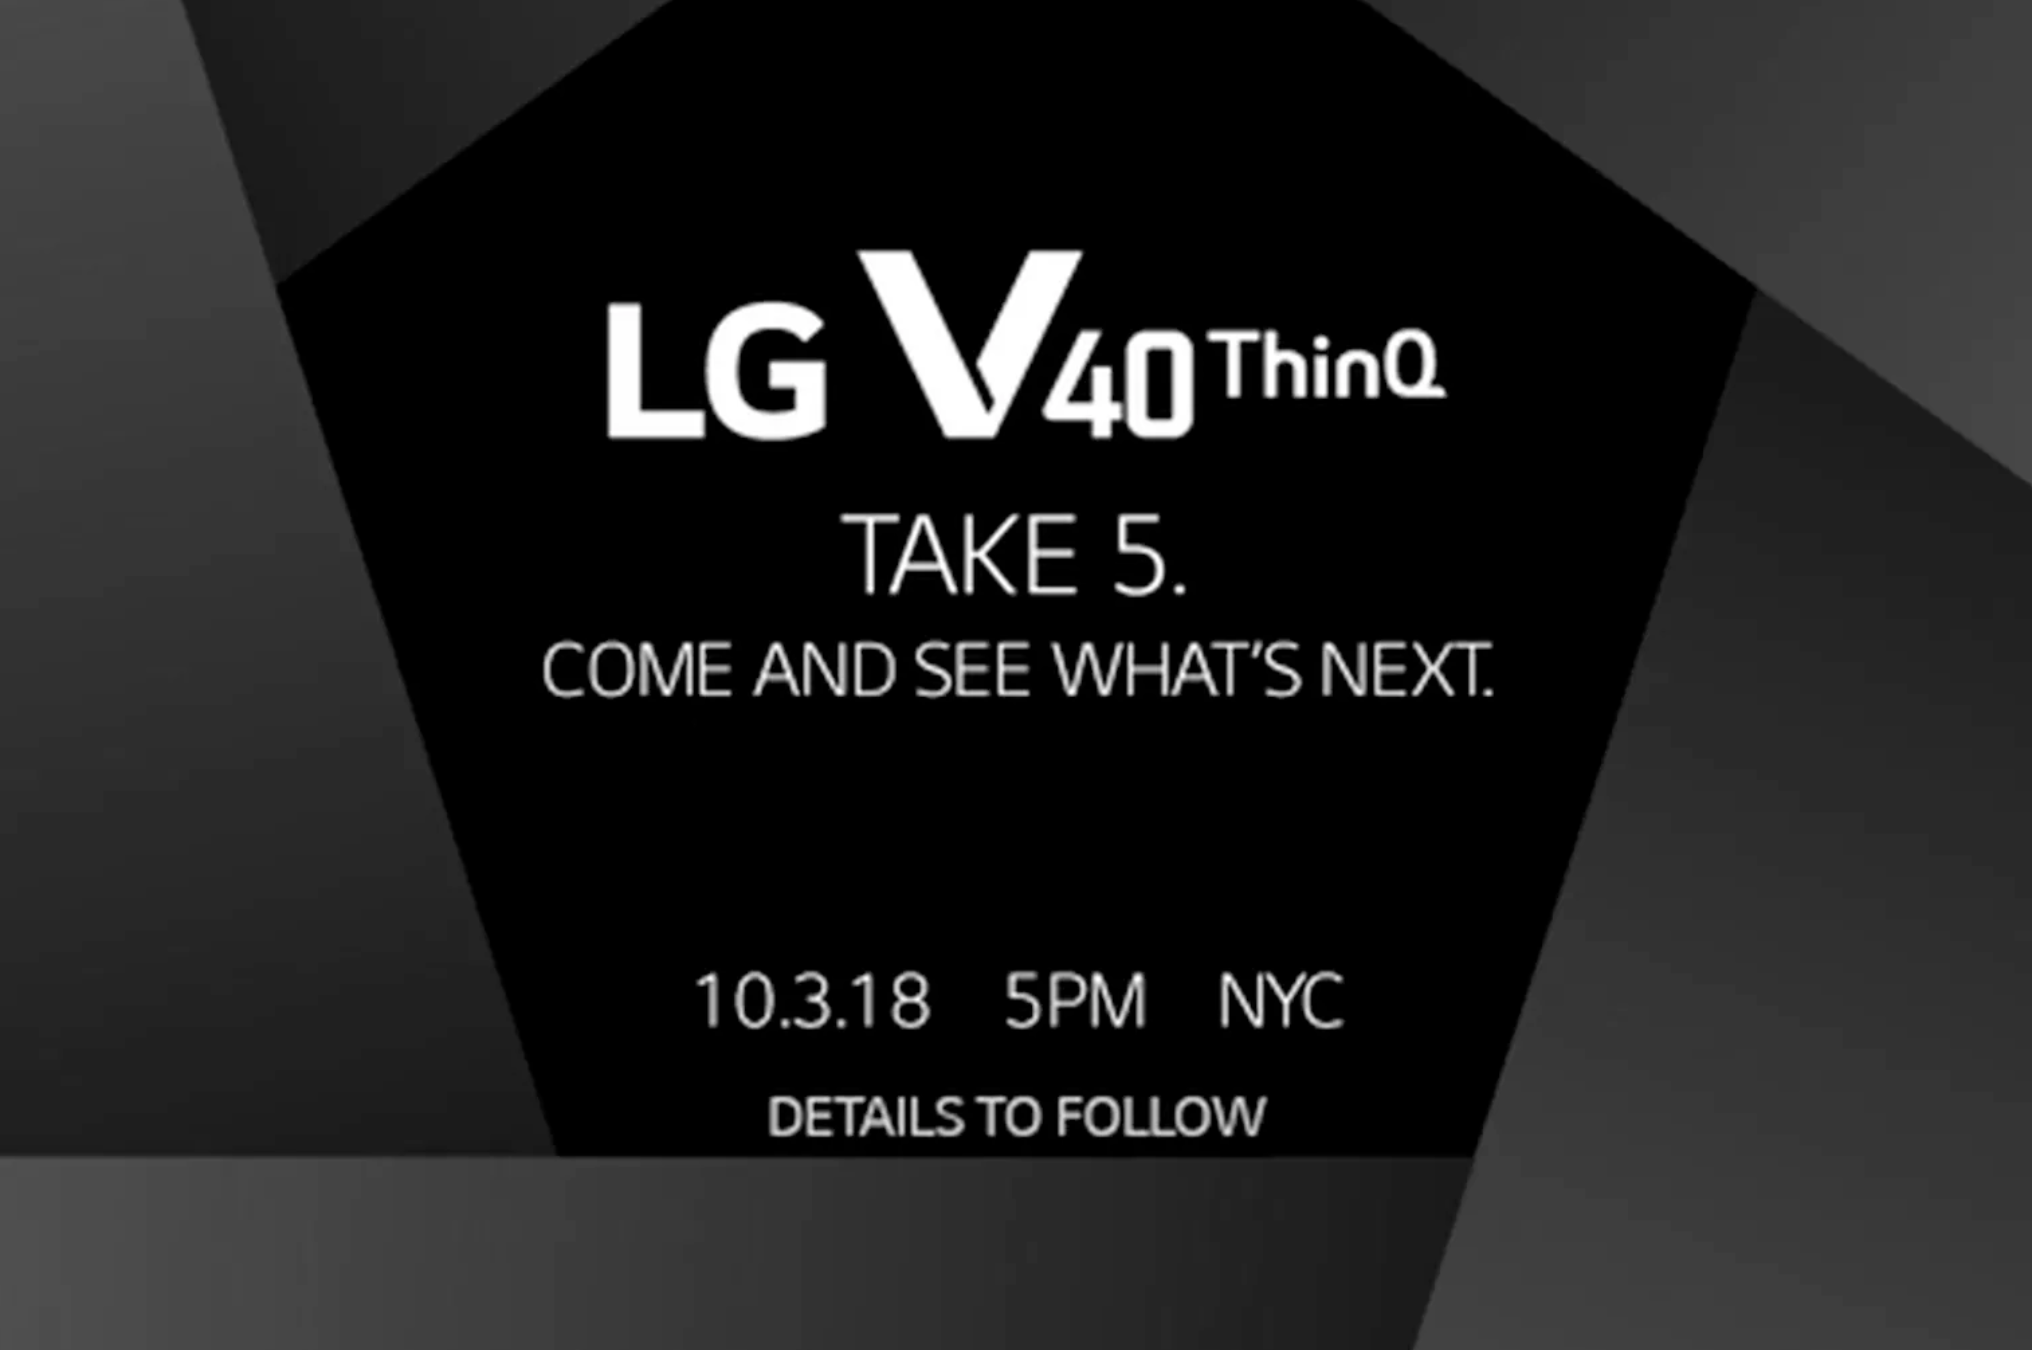 When will the LG V40 ThinQ be out?